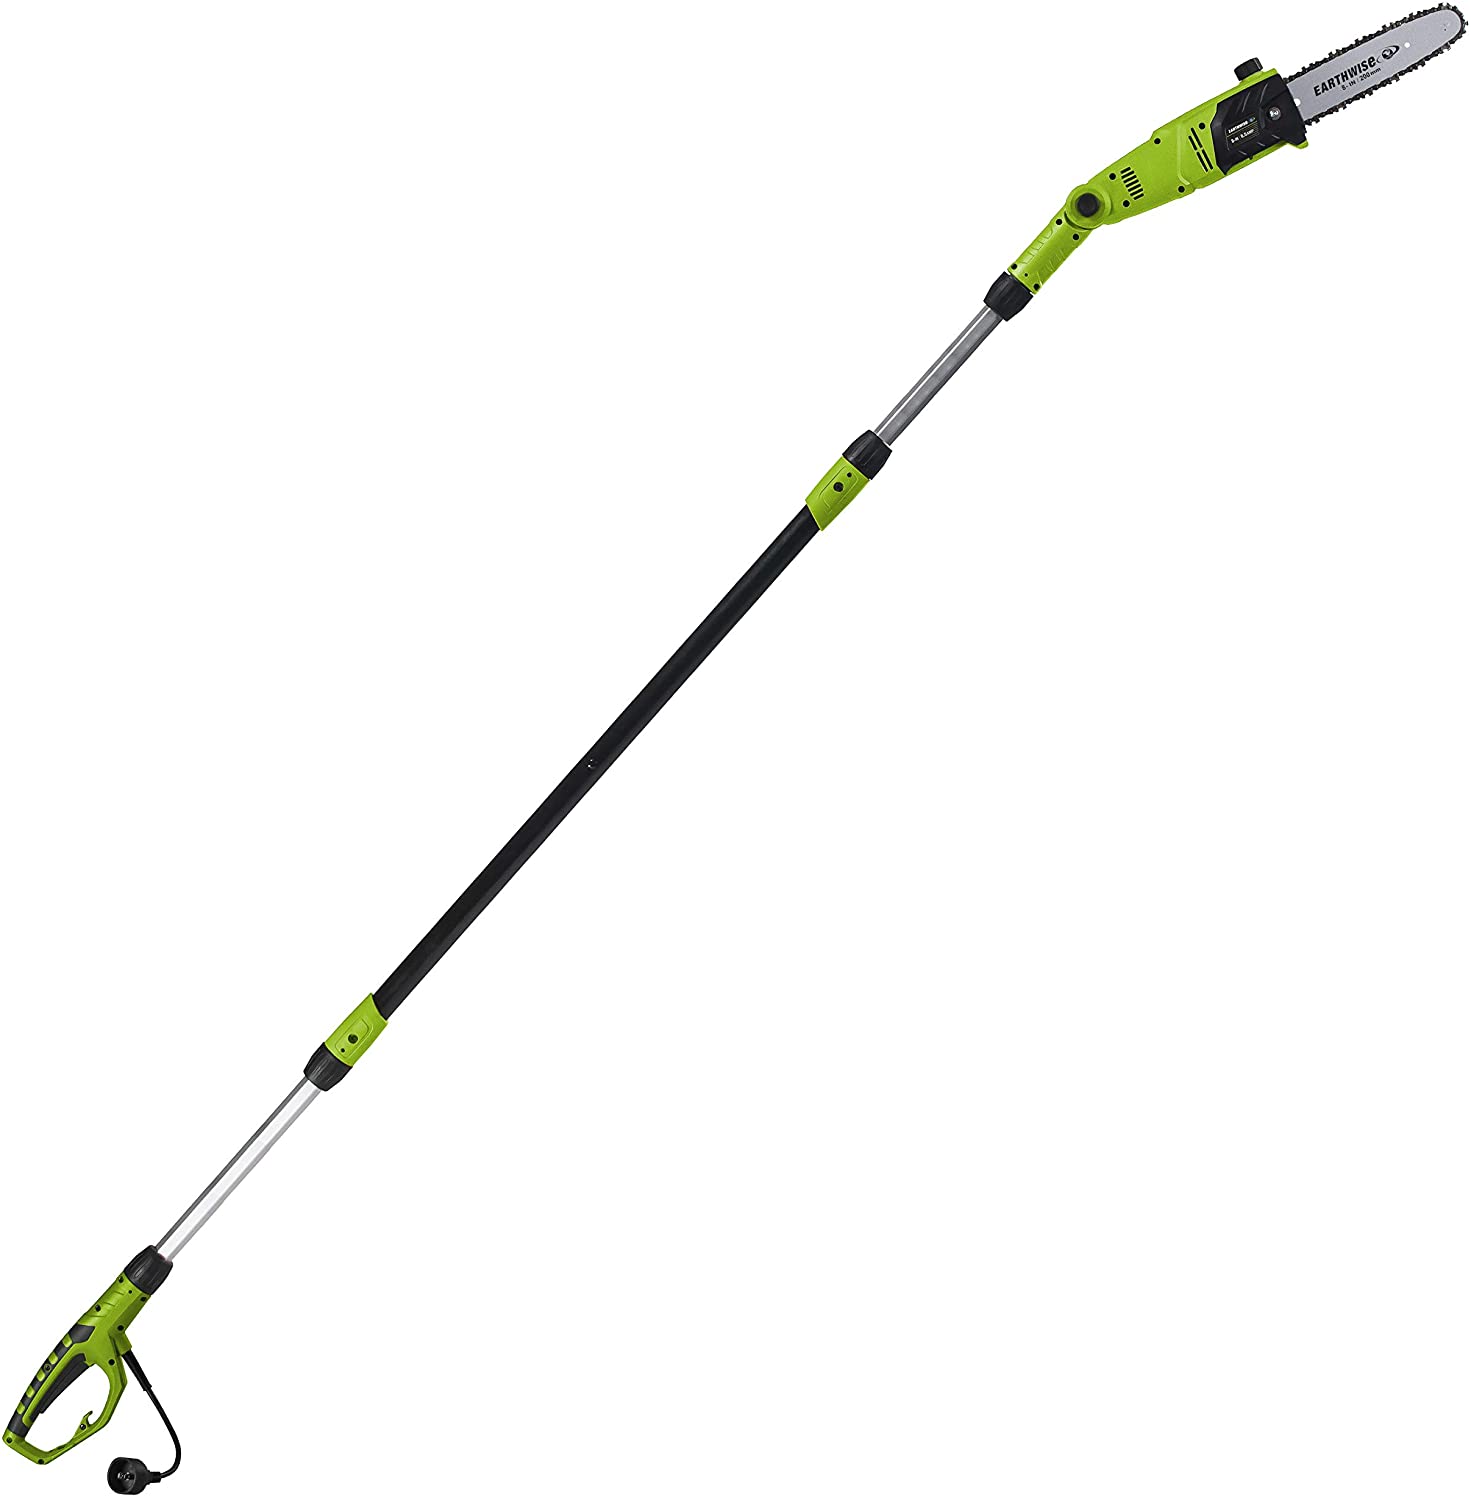 Earthwise PS44008 Electric Pole Saw